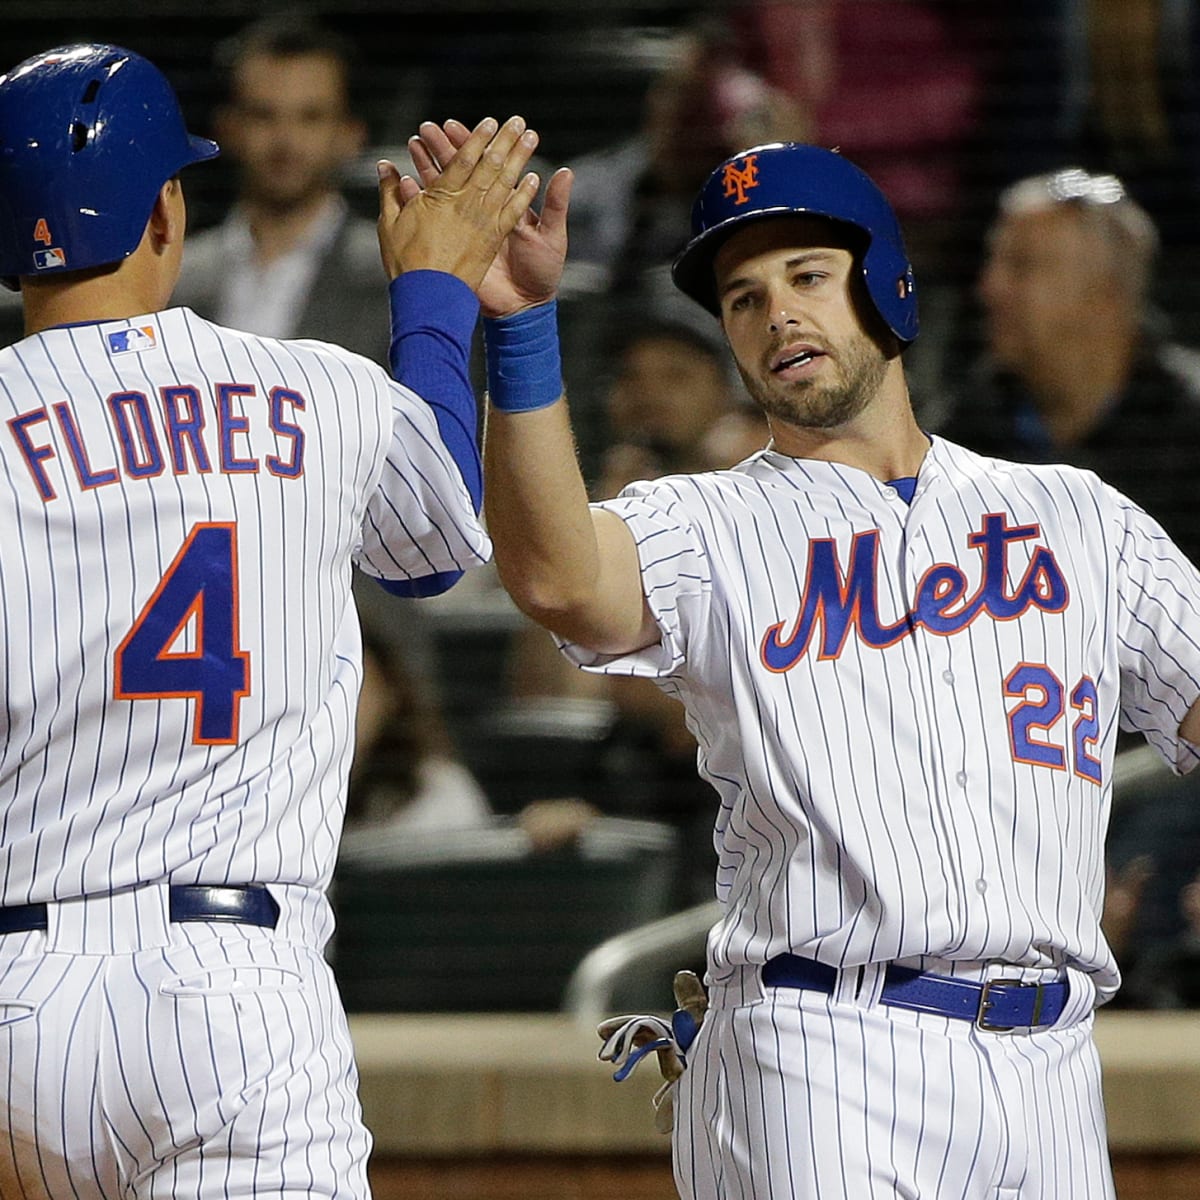 Granderson homers, Mets rally from 5 down to beat Rockies